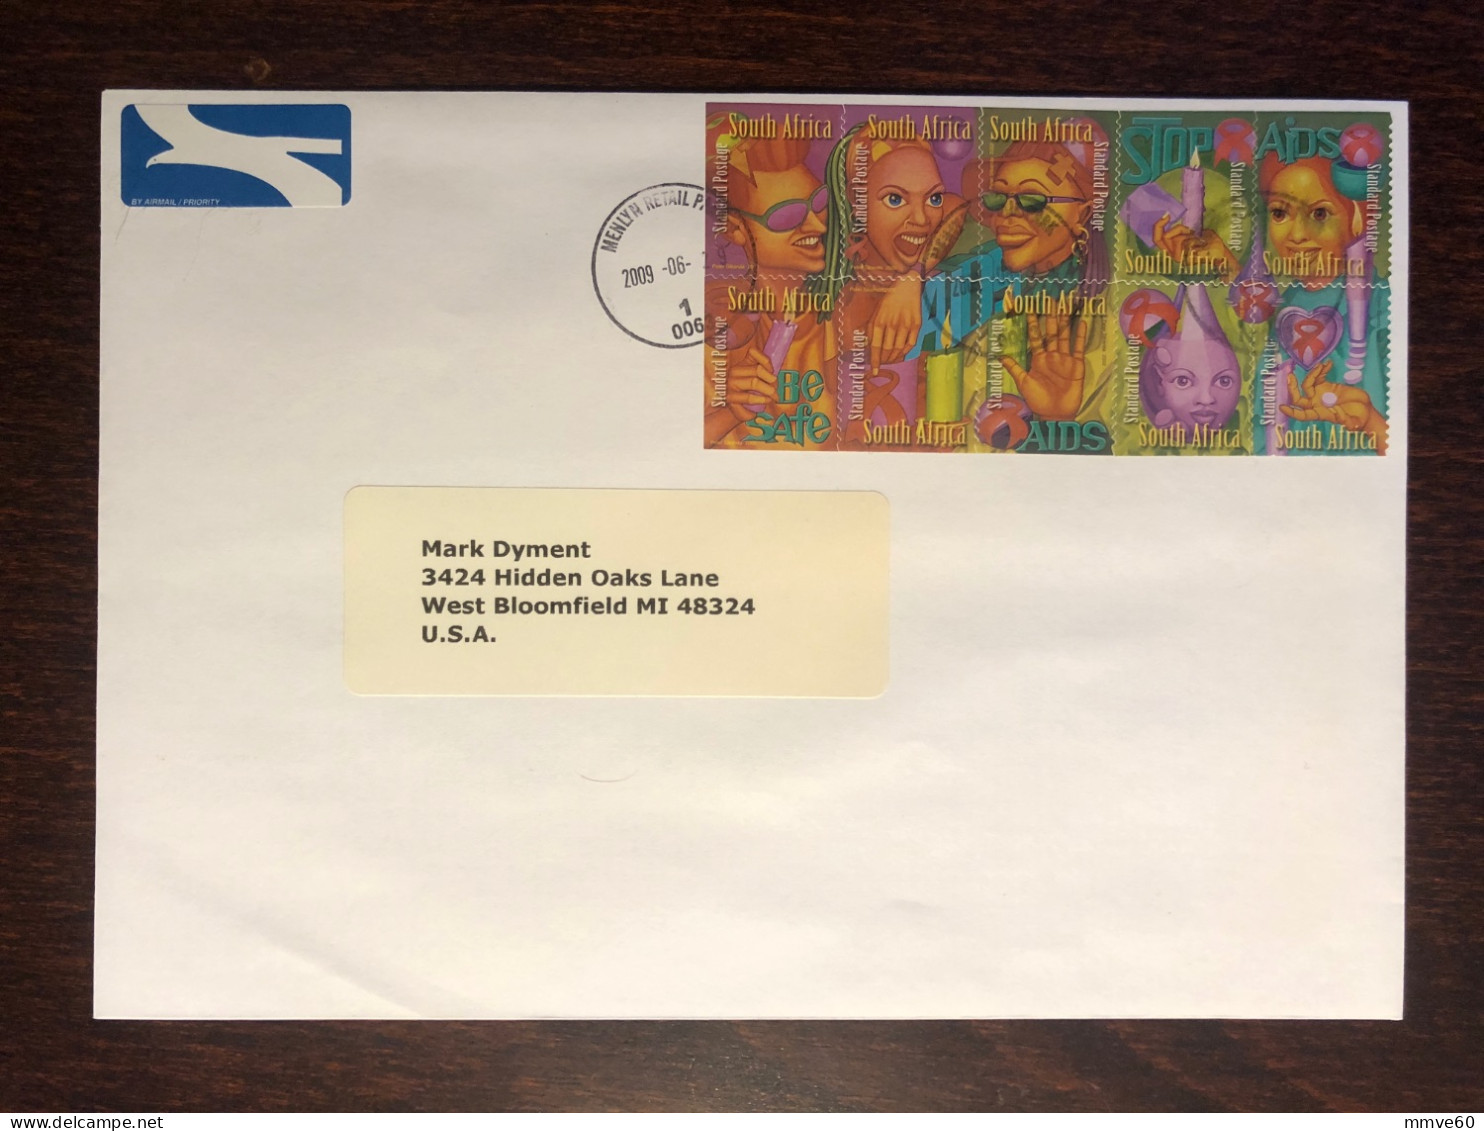 SOUTH AFRICA COVER 2009 YEAR AIDS SIDA  HEALTH MEDICINE STAMPS - FDC